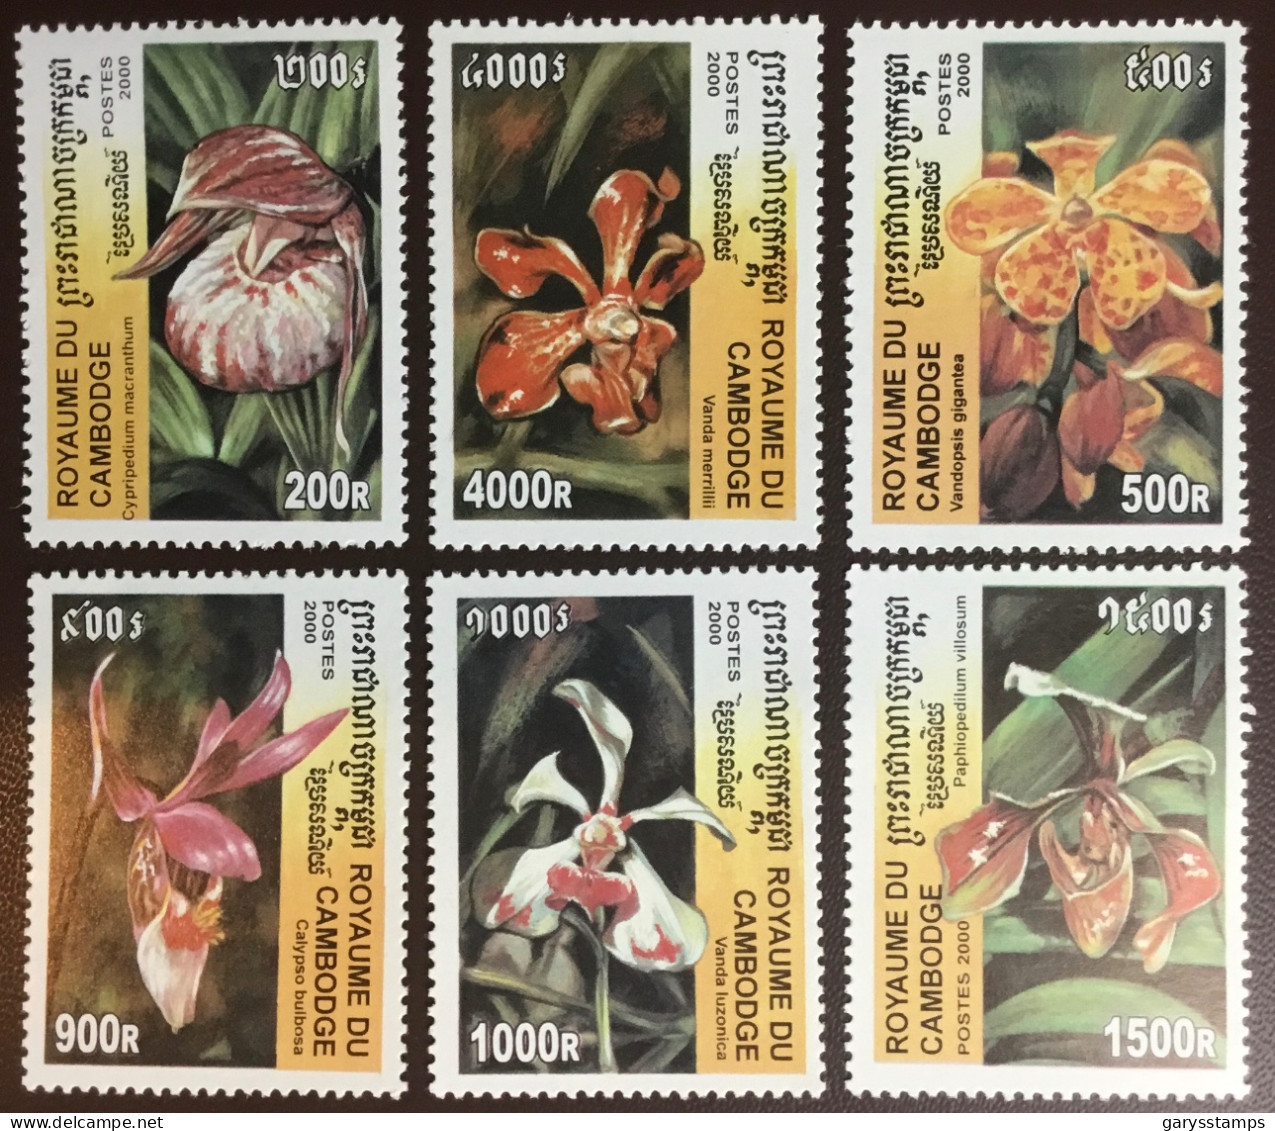 Cambodia 2000 Orchids Flowers MNH - Orchideen